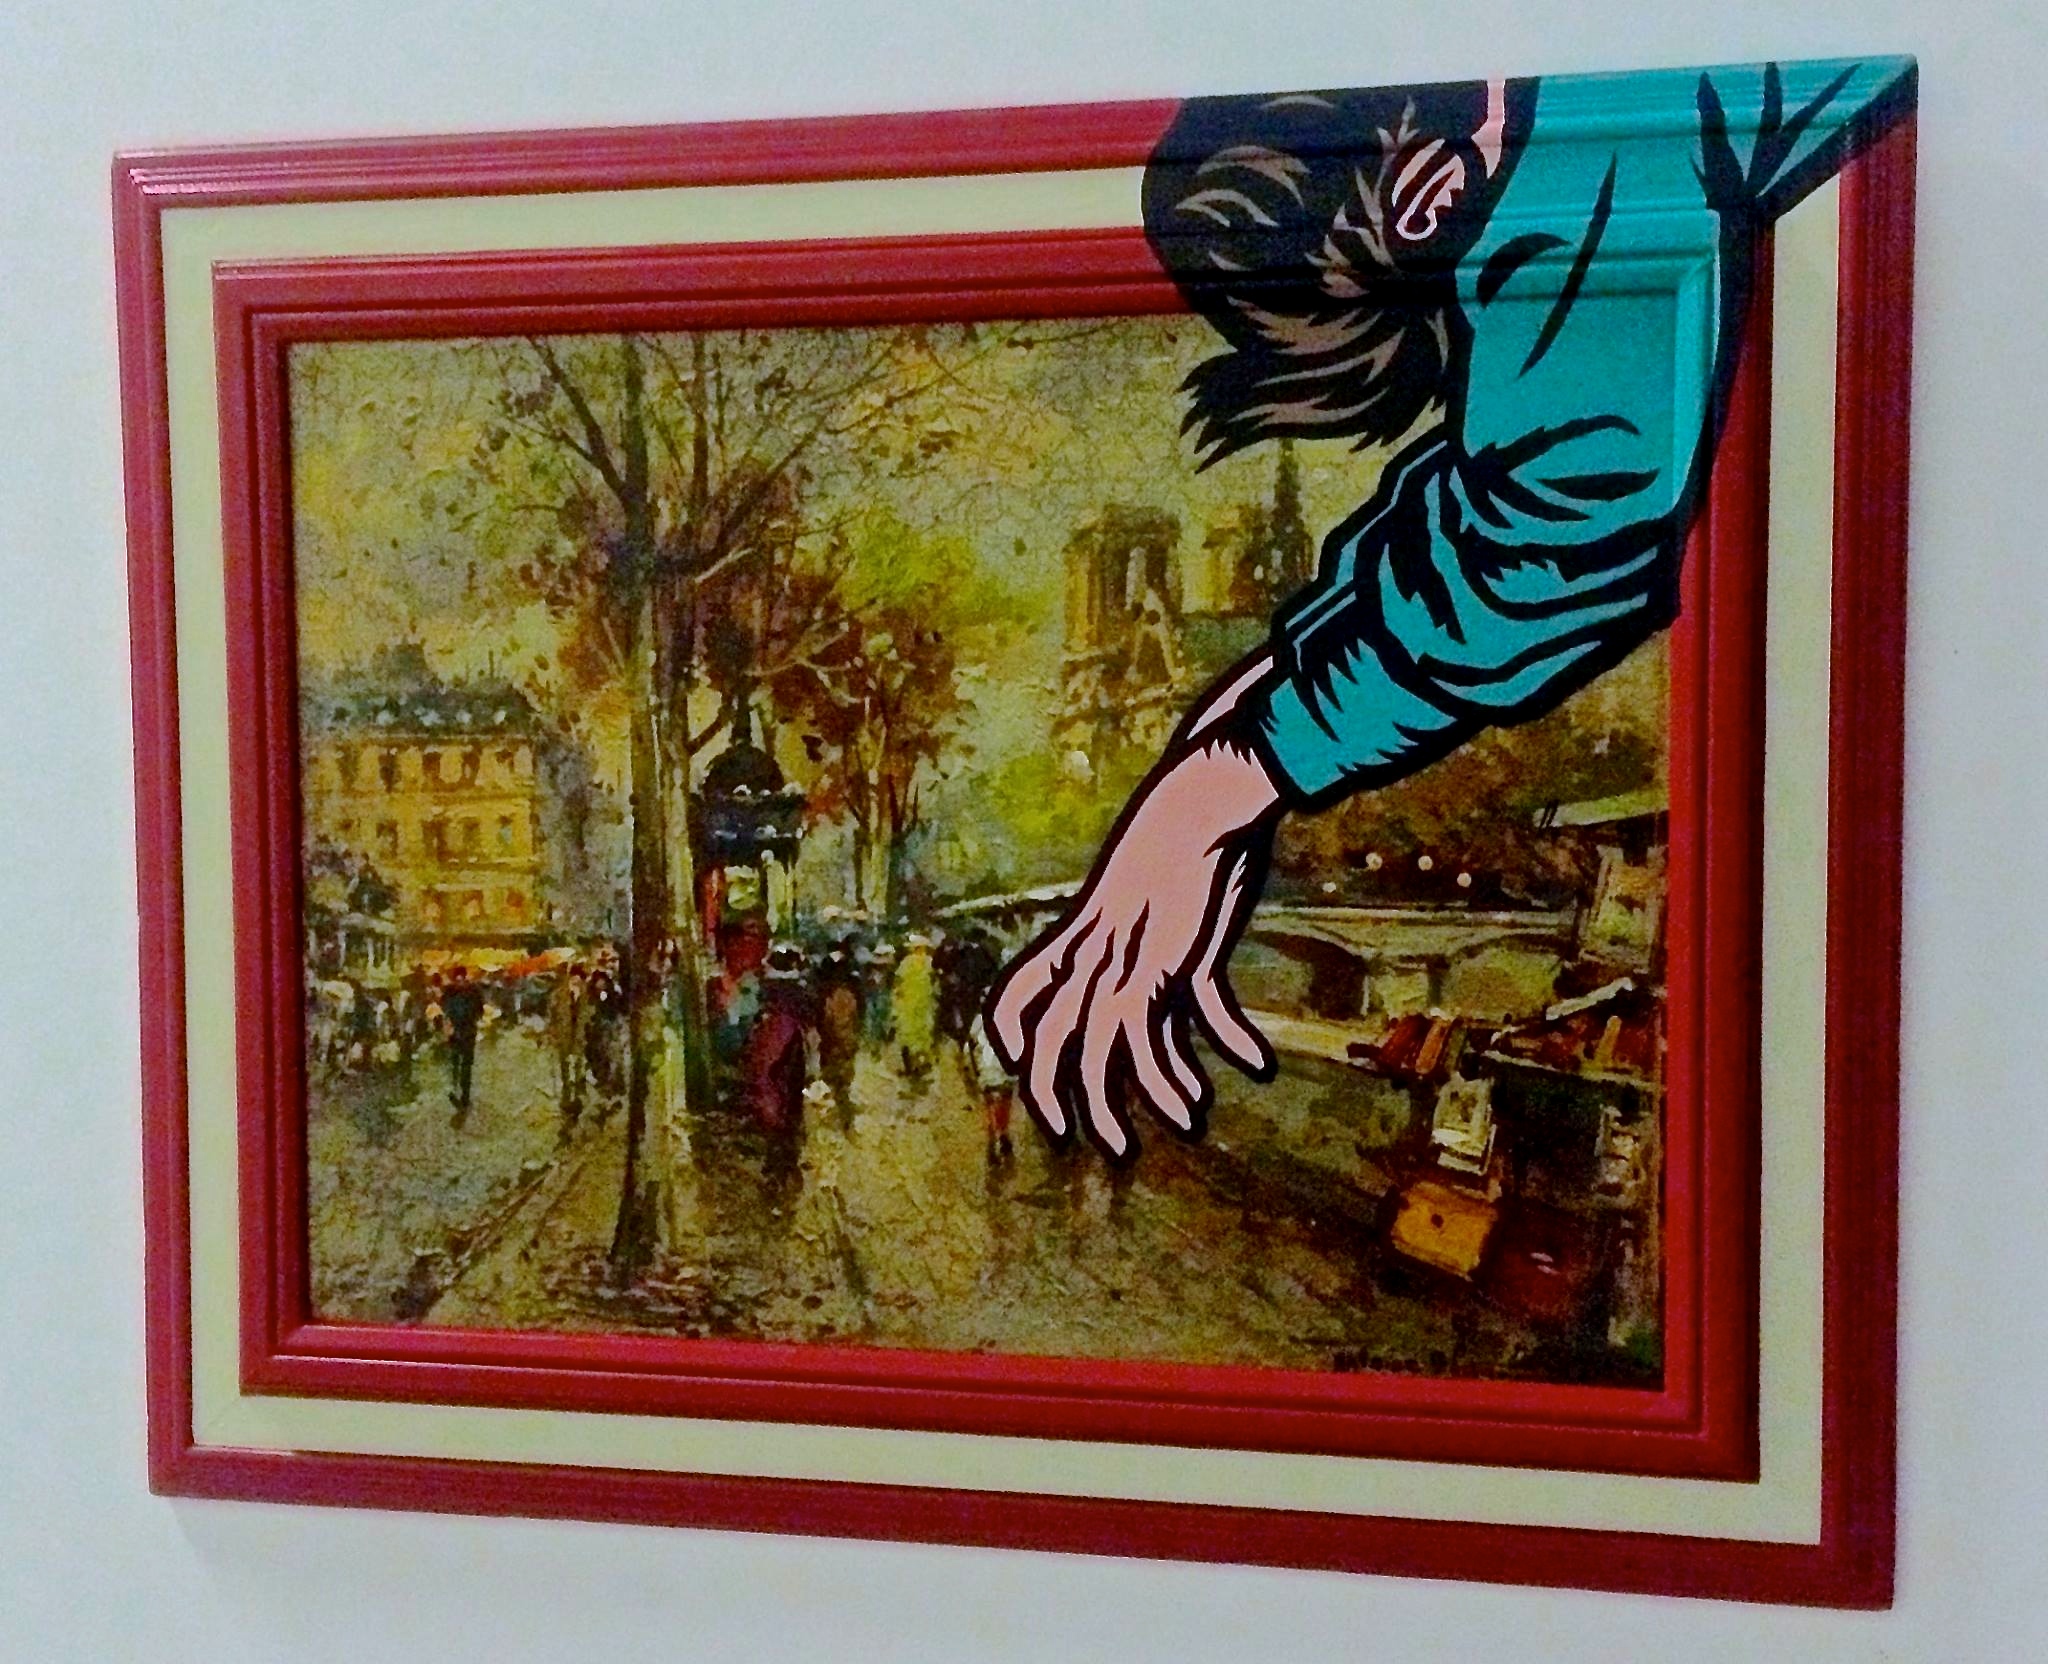 Keep your travel stories to a minimum" Acrylic & spray paint on found/vintage painting/frame.